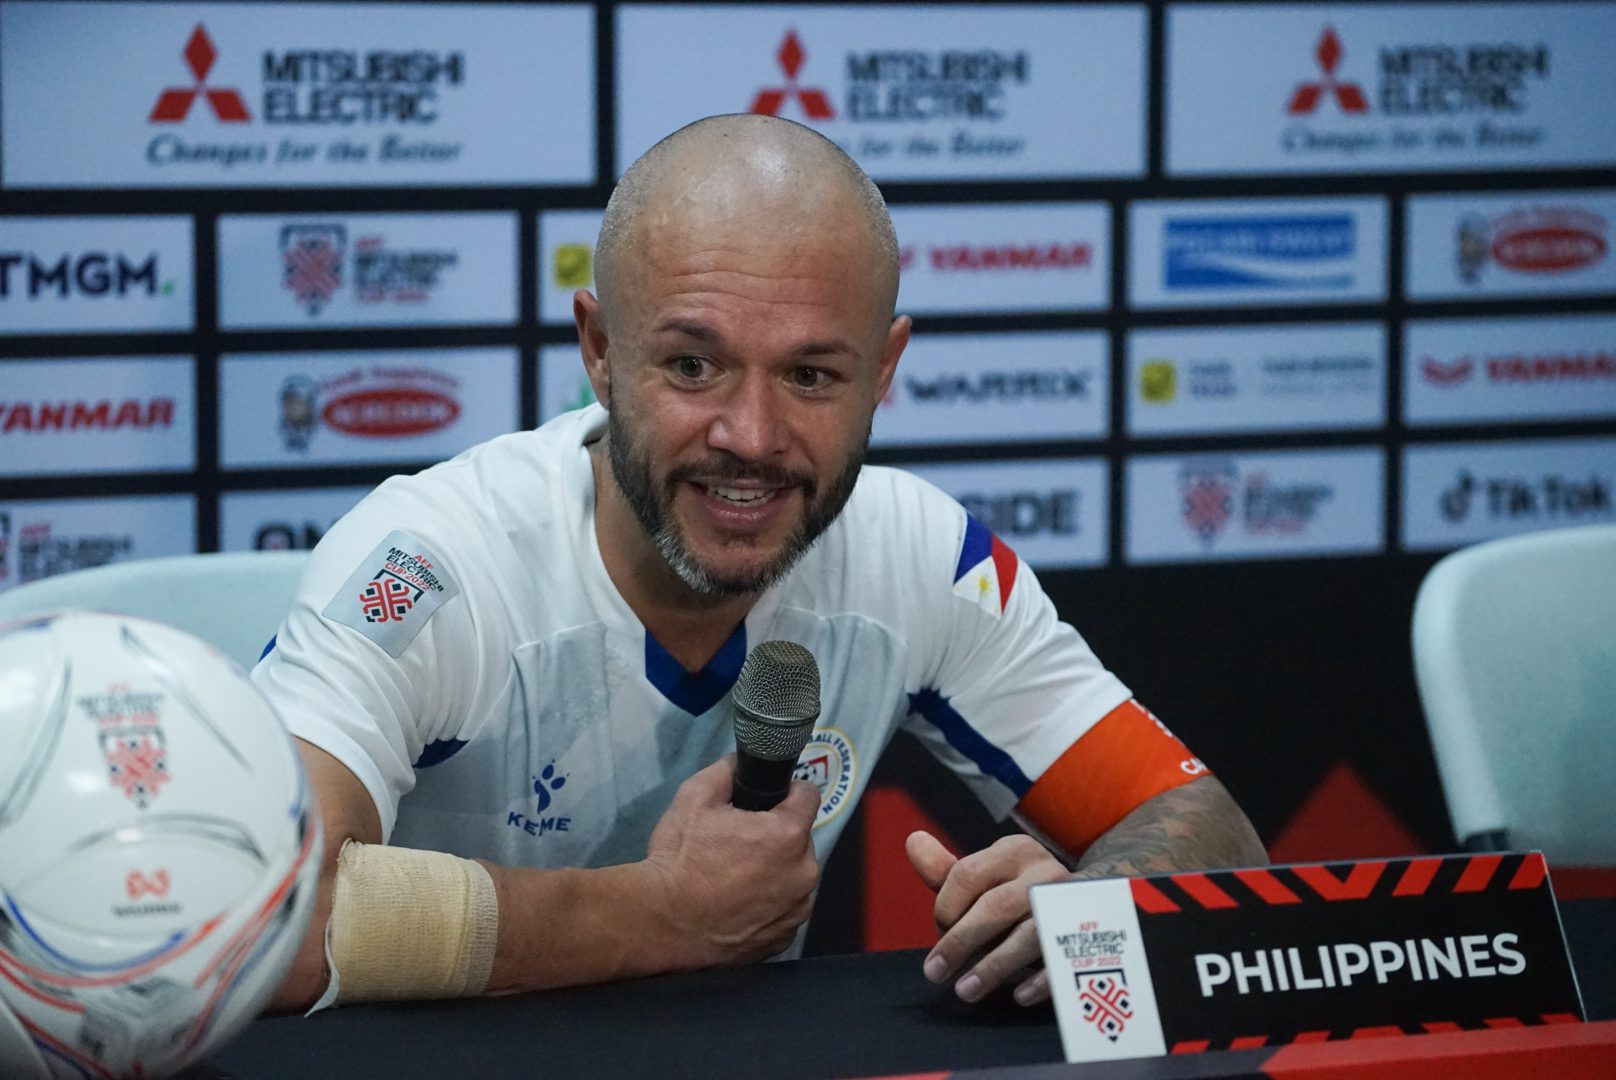 Schrock desires future involvement with Philippine football after retirement